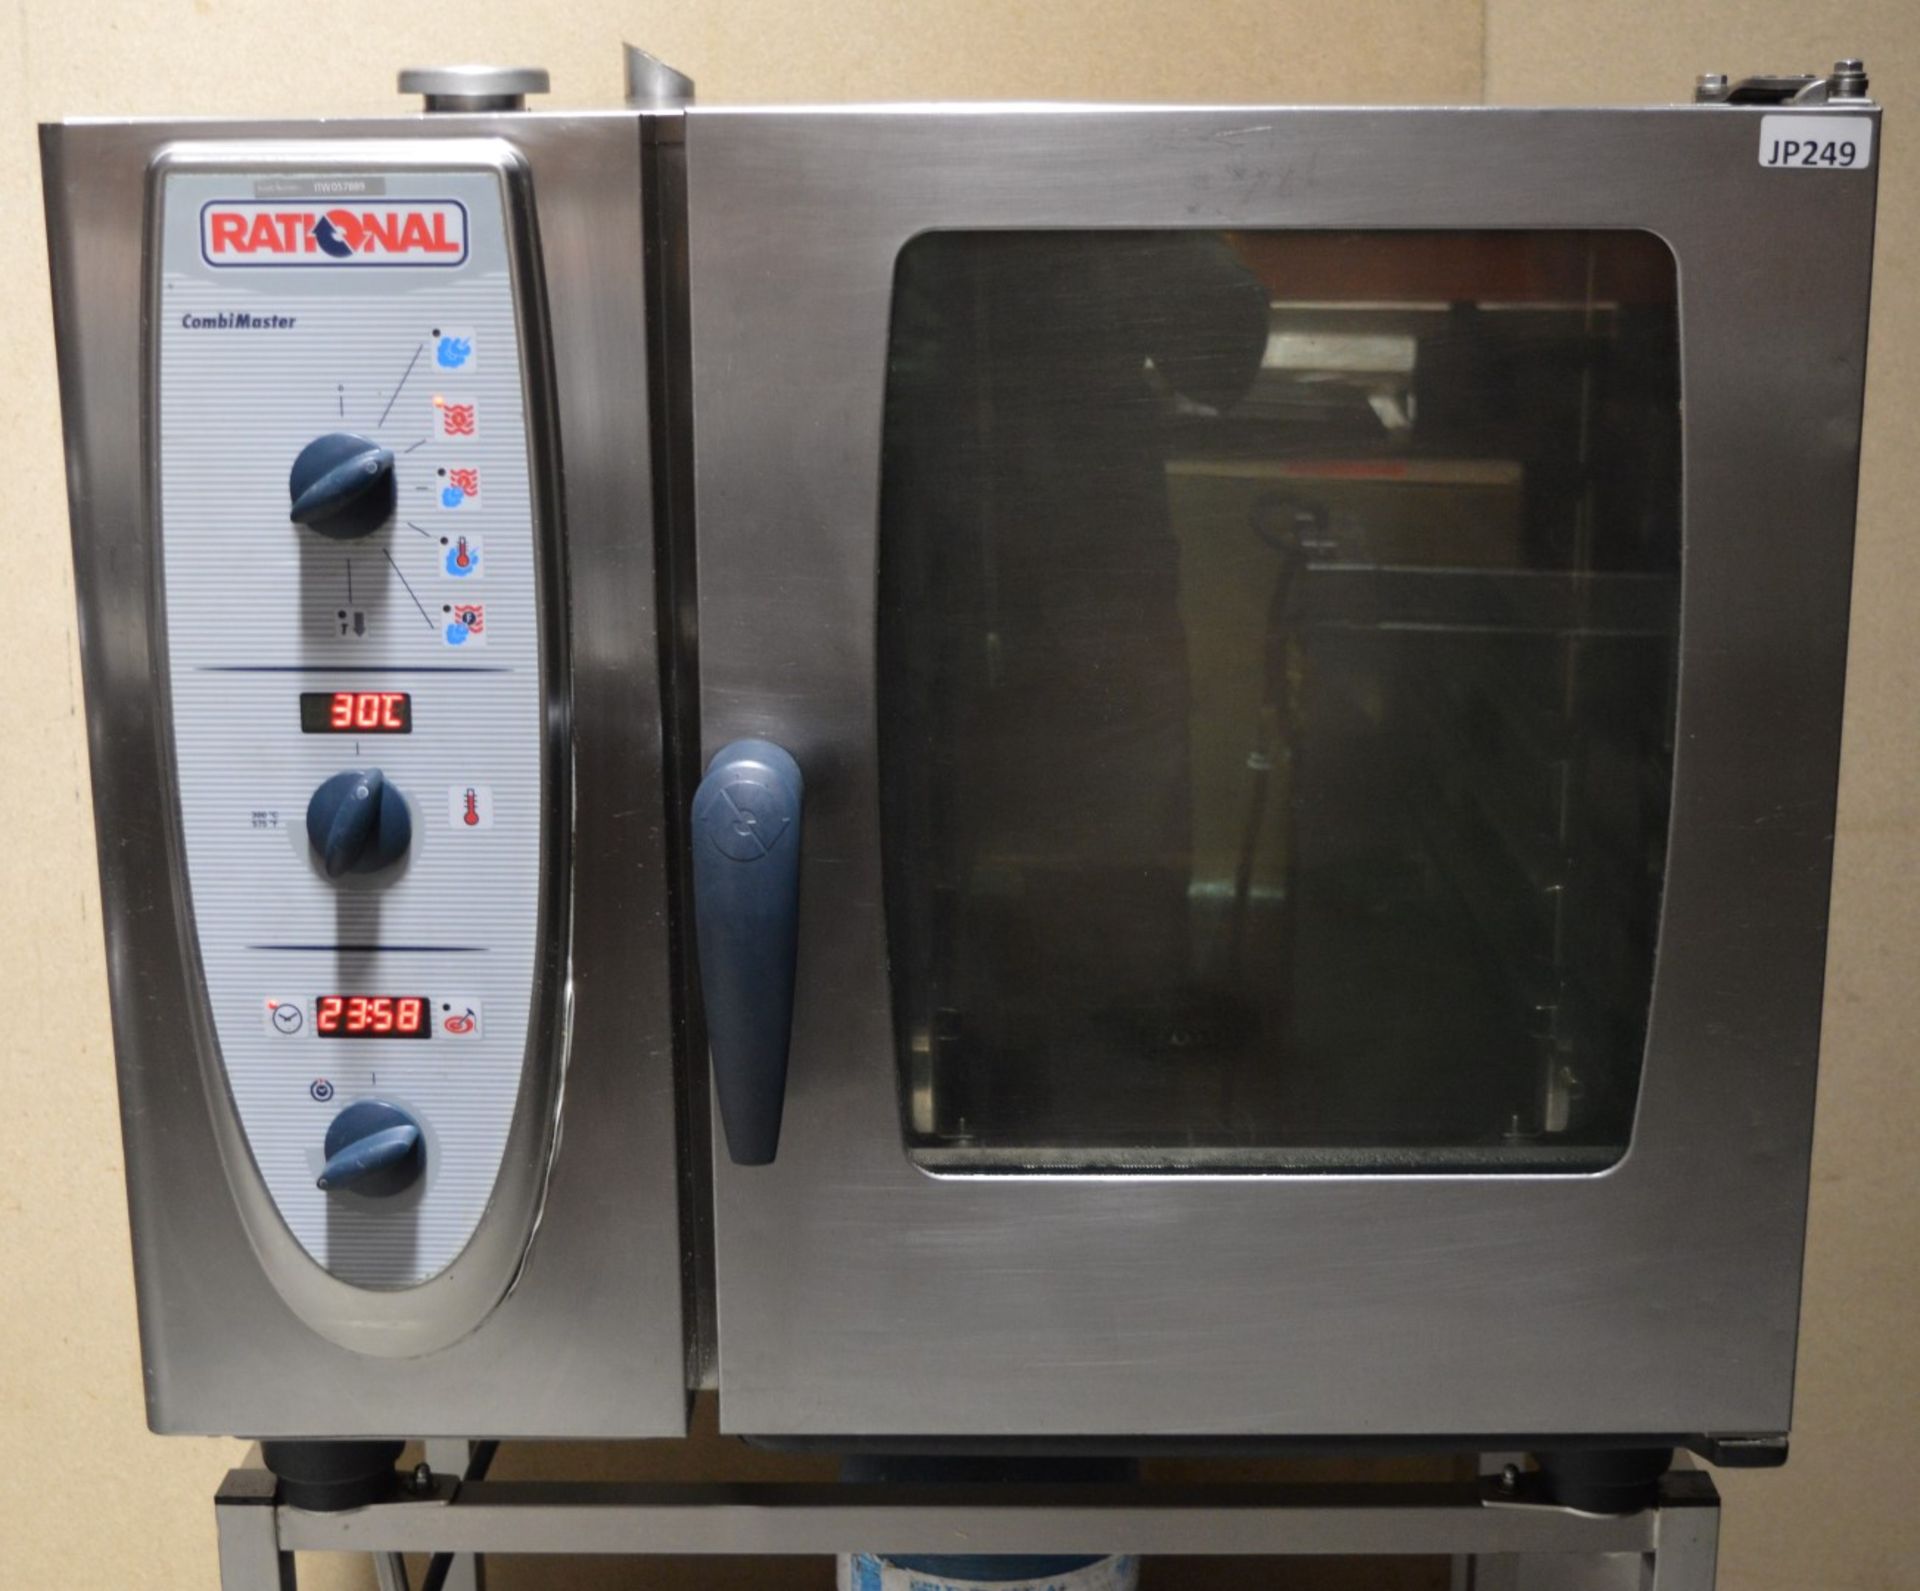 1 x Rational CombiMaster 6 Grid Combi Oven With Stand - CL232 - 3 Phase - H146x W85 x D82 cms - - Image 7 of 11